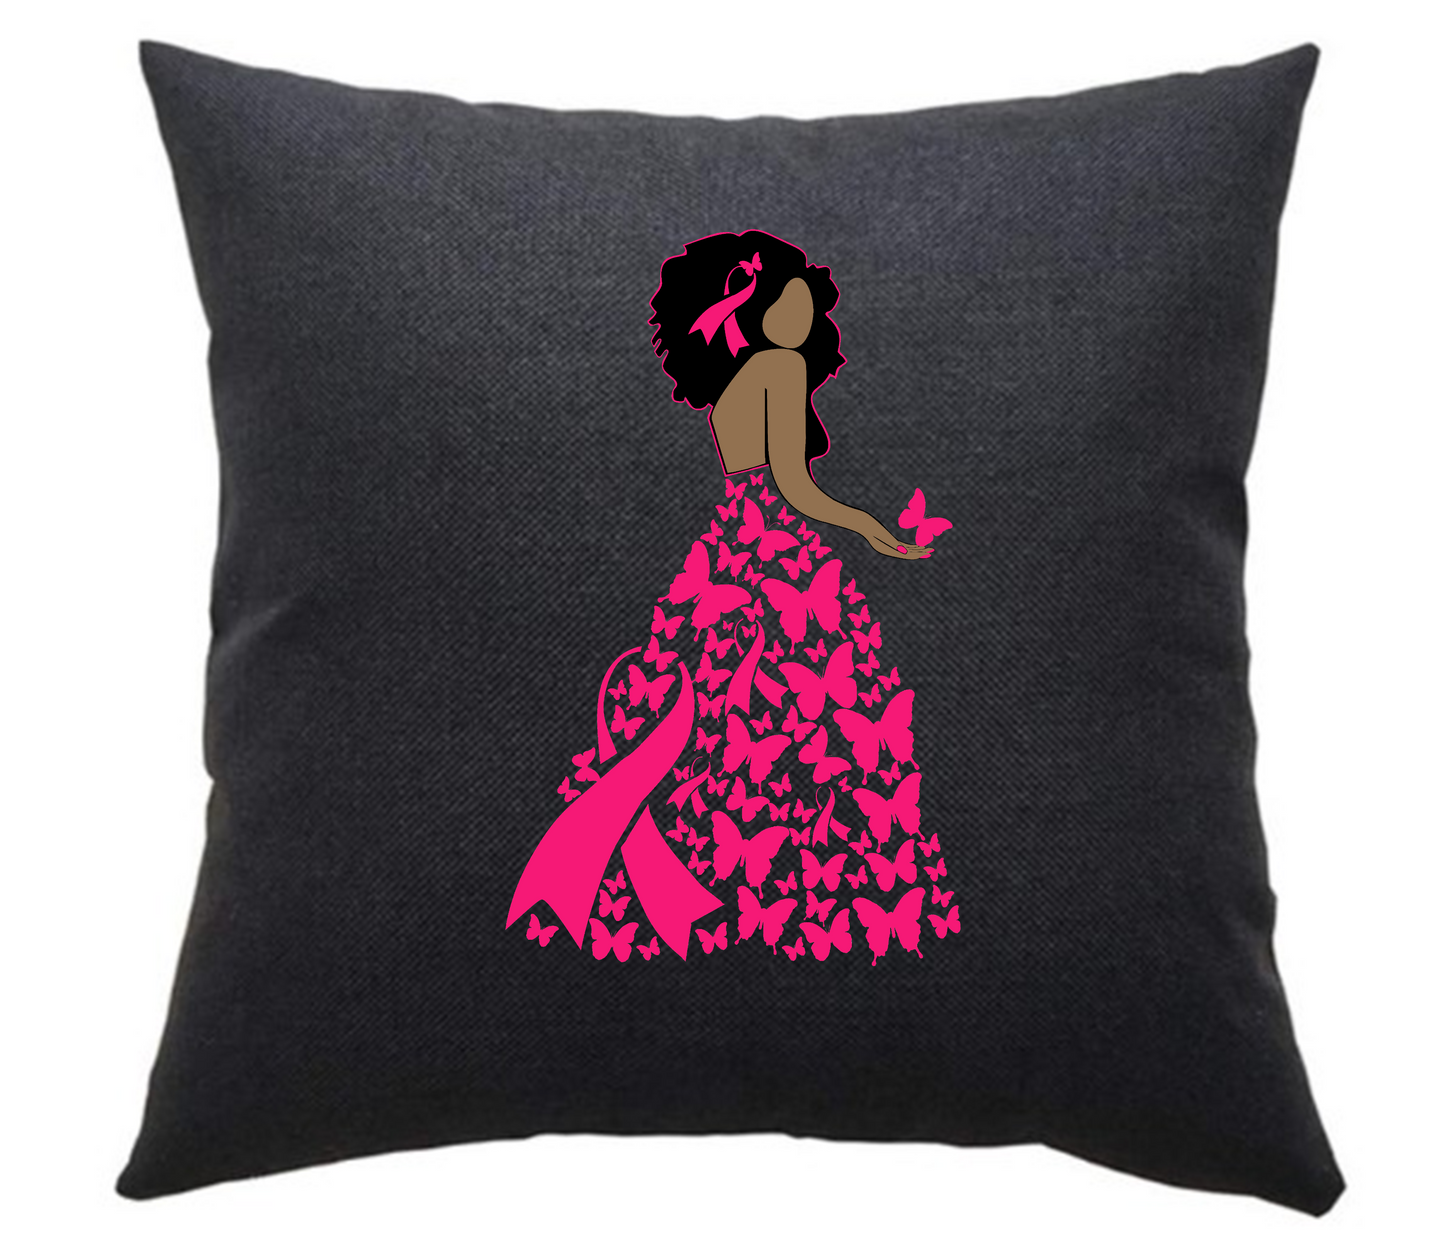 Butterfly Ribbon Breast Cancer Awareness Throw Pillow Cover